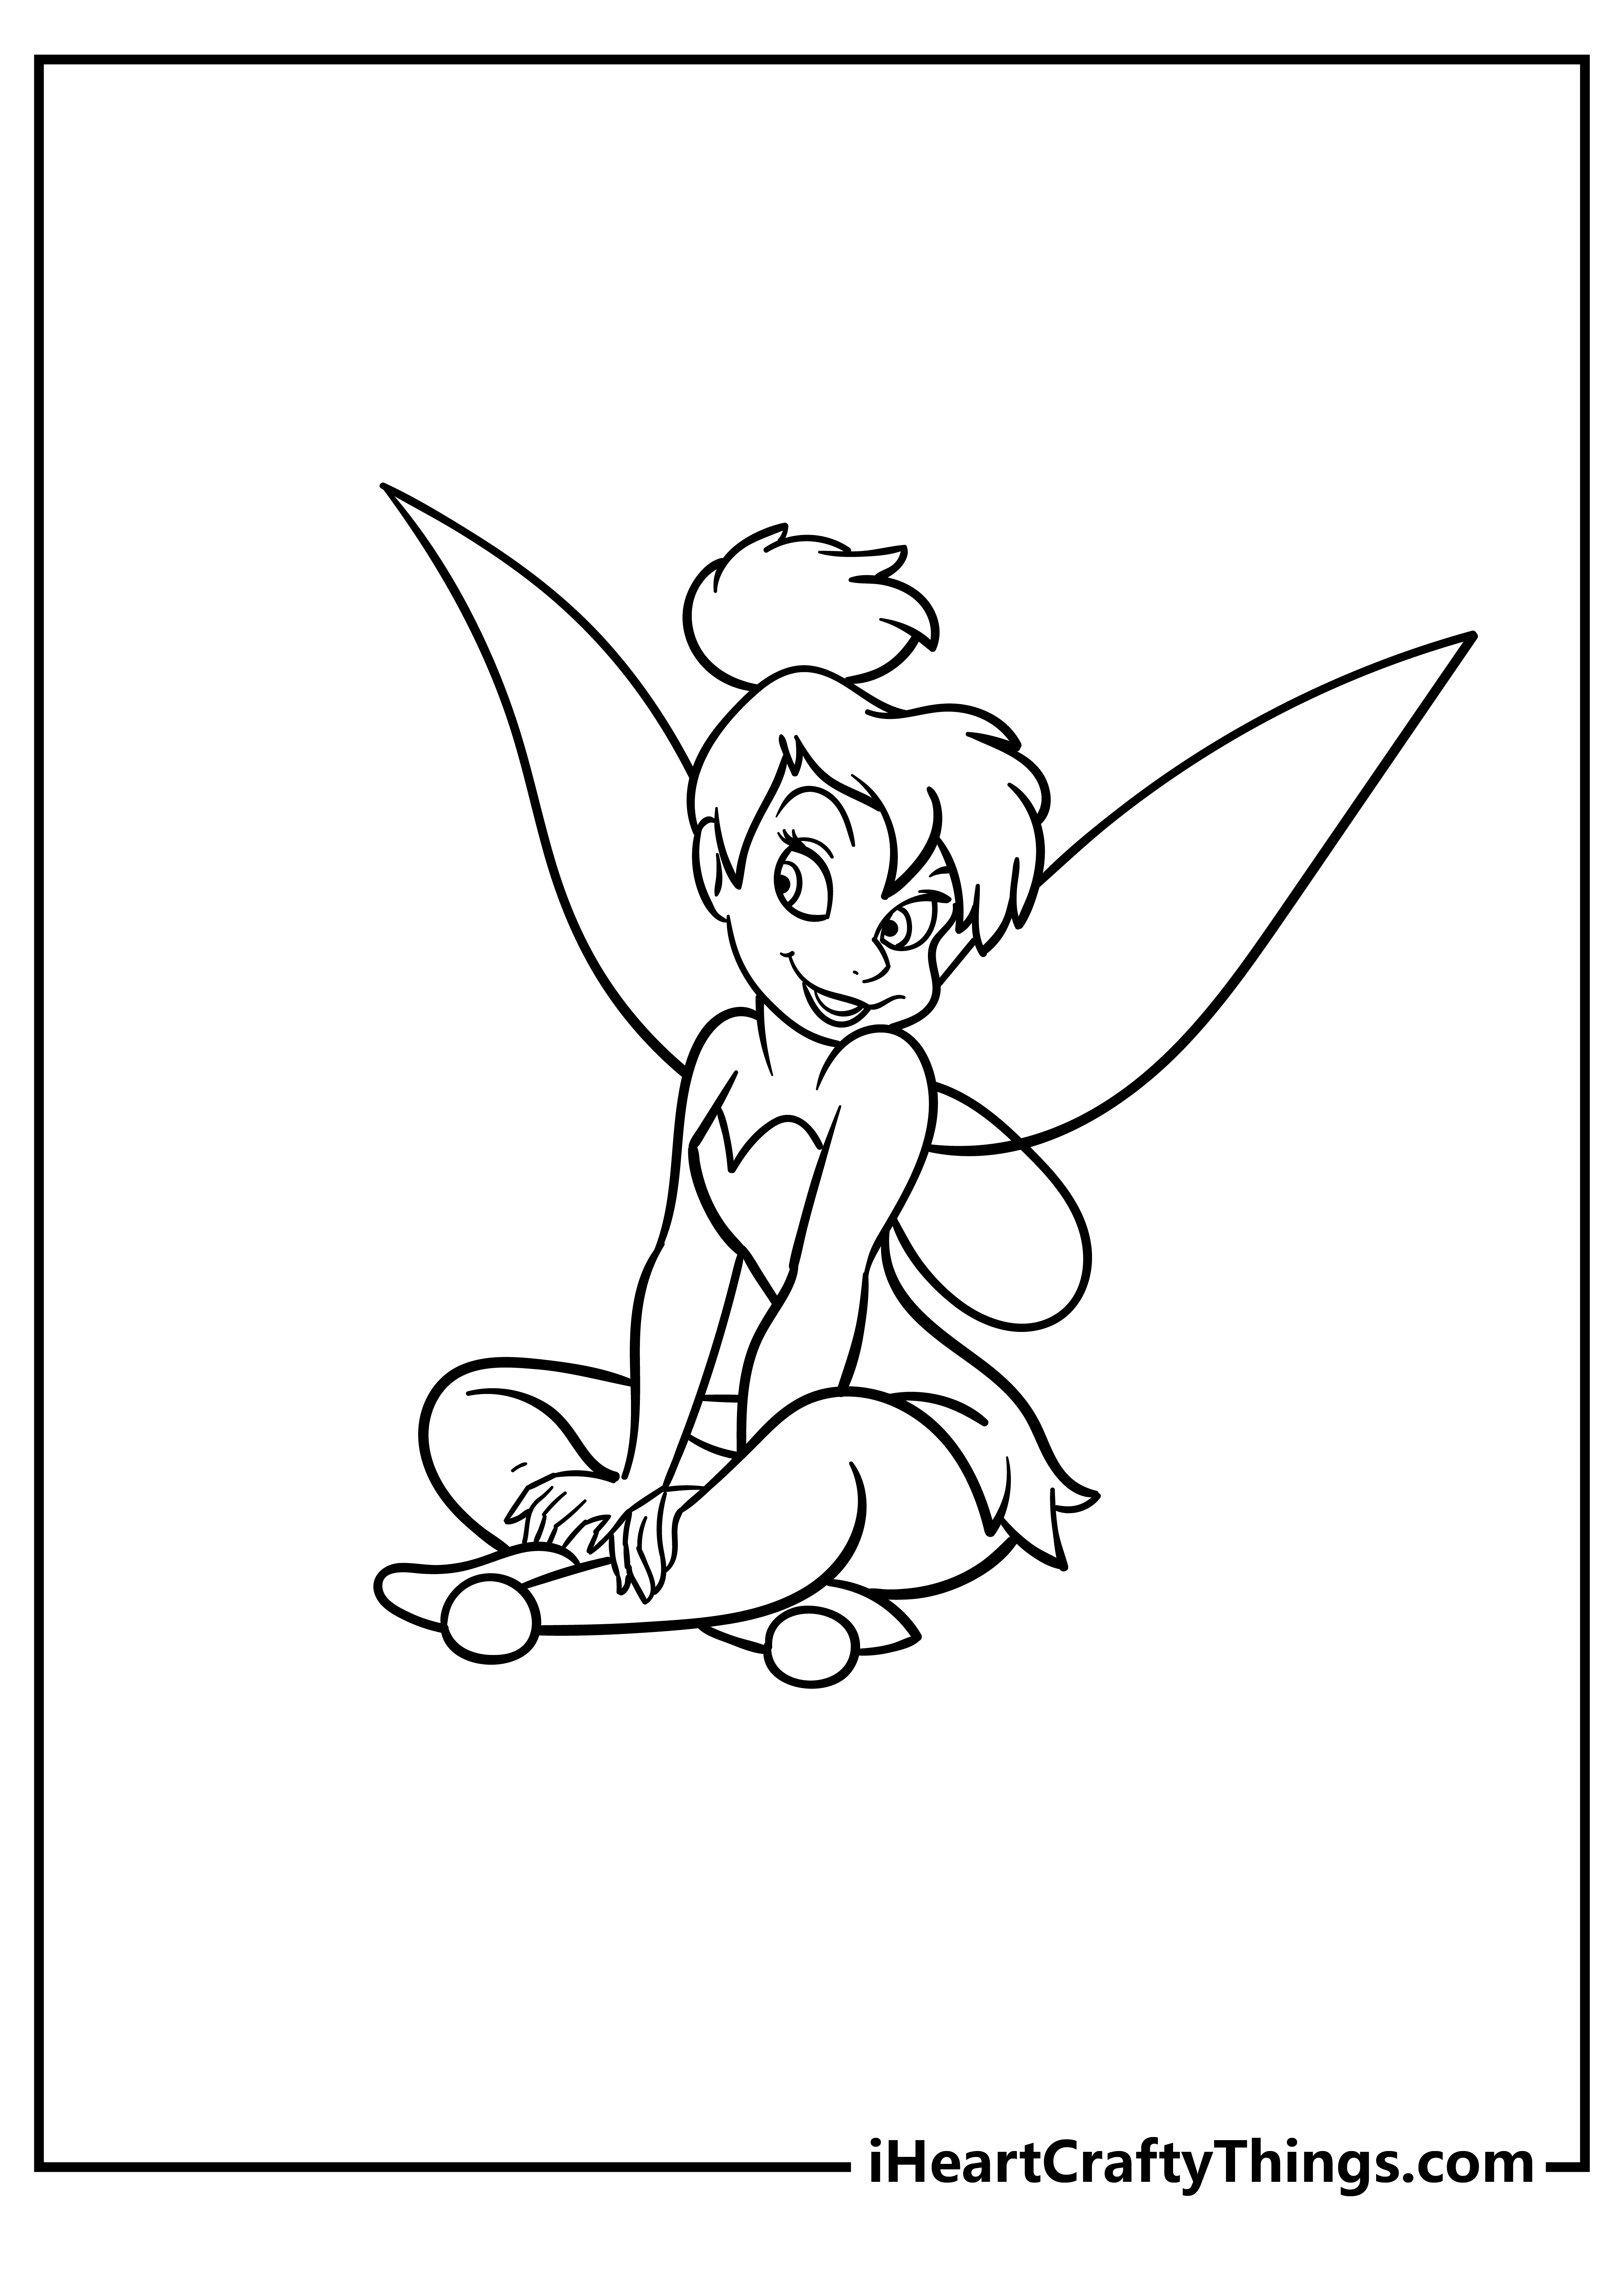 Tinkerbell Coloring Pages free pdf download